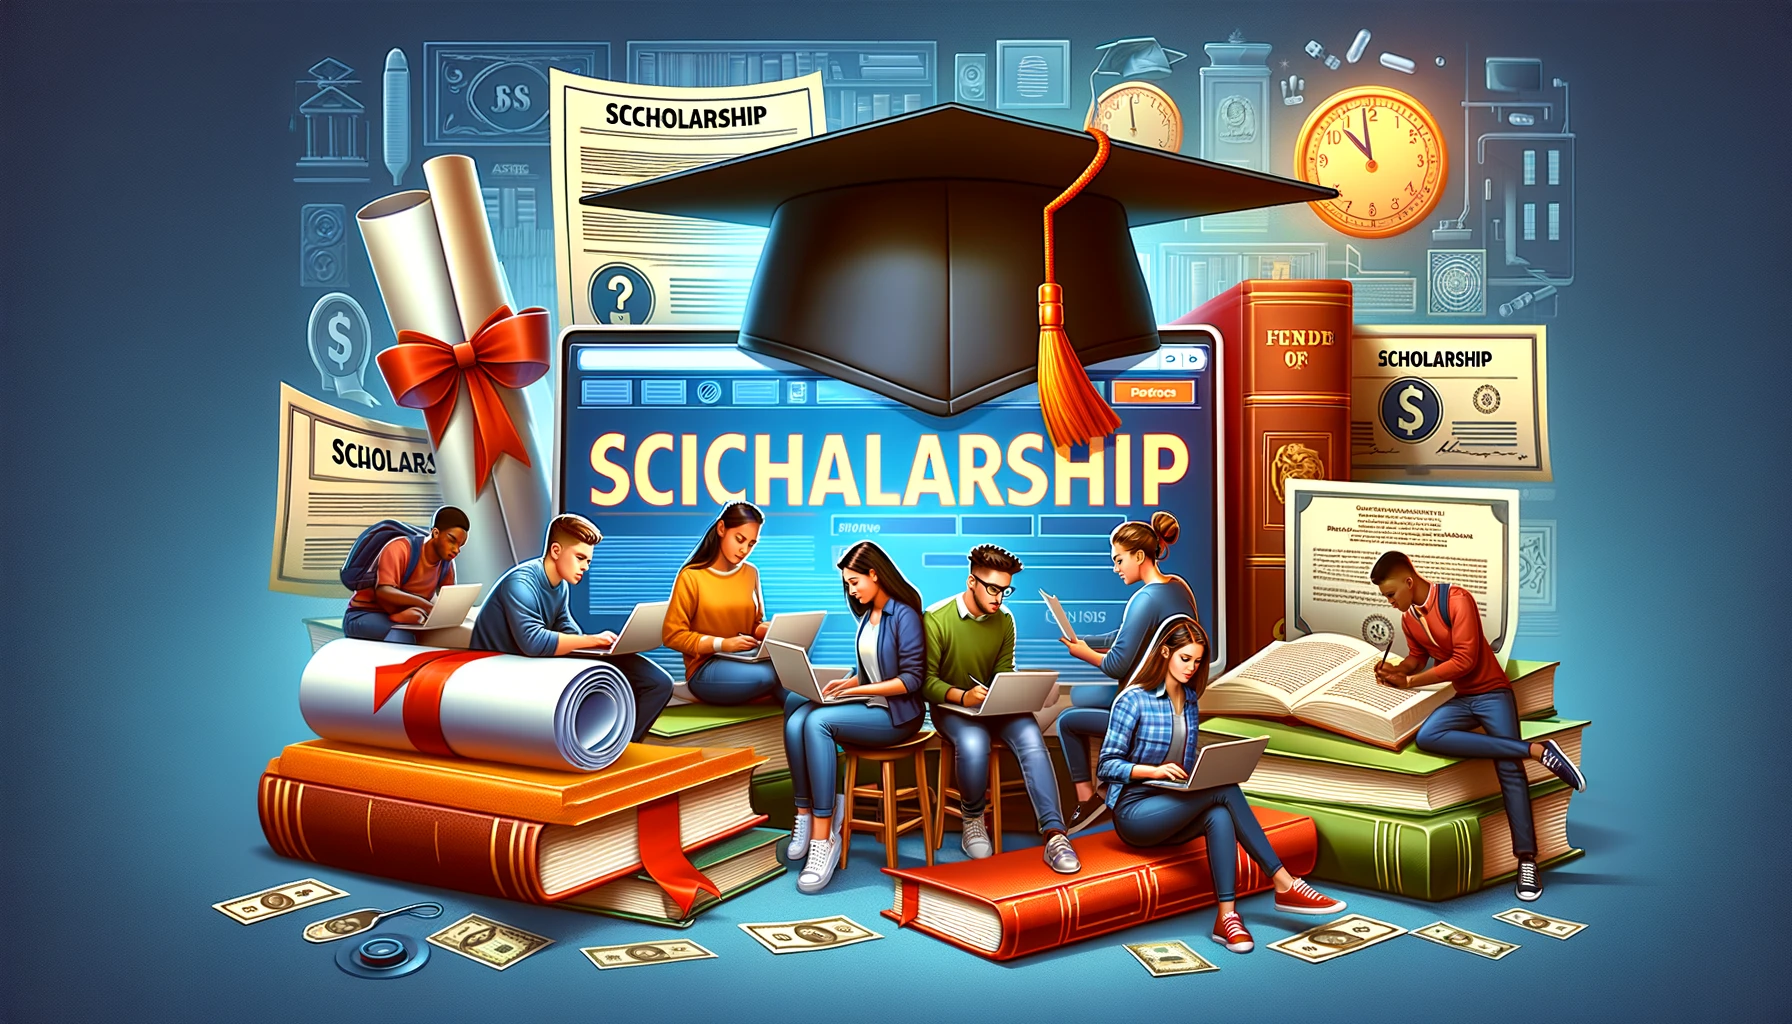 10 Tips for Finding and Applying to Scholarships